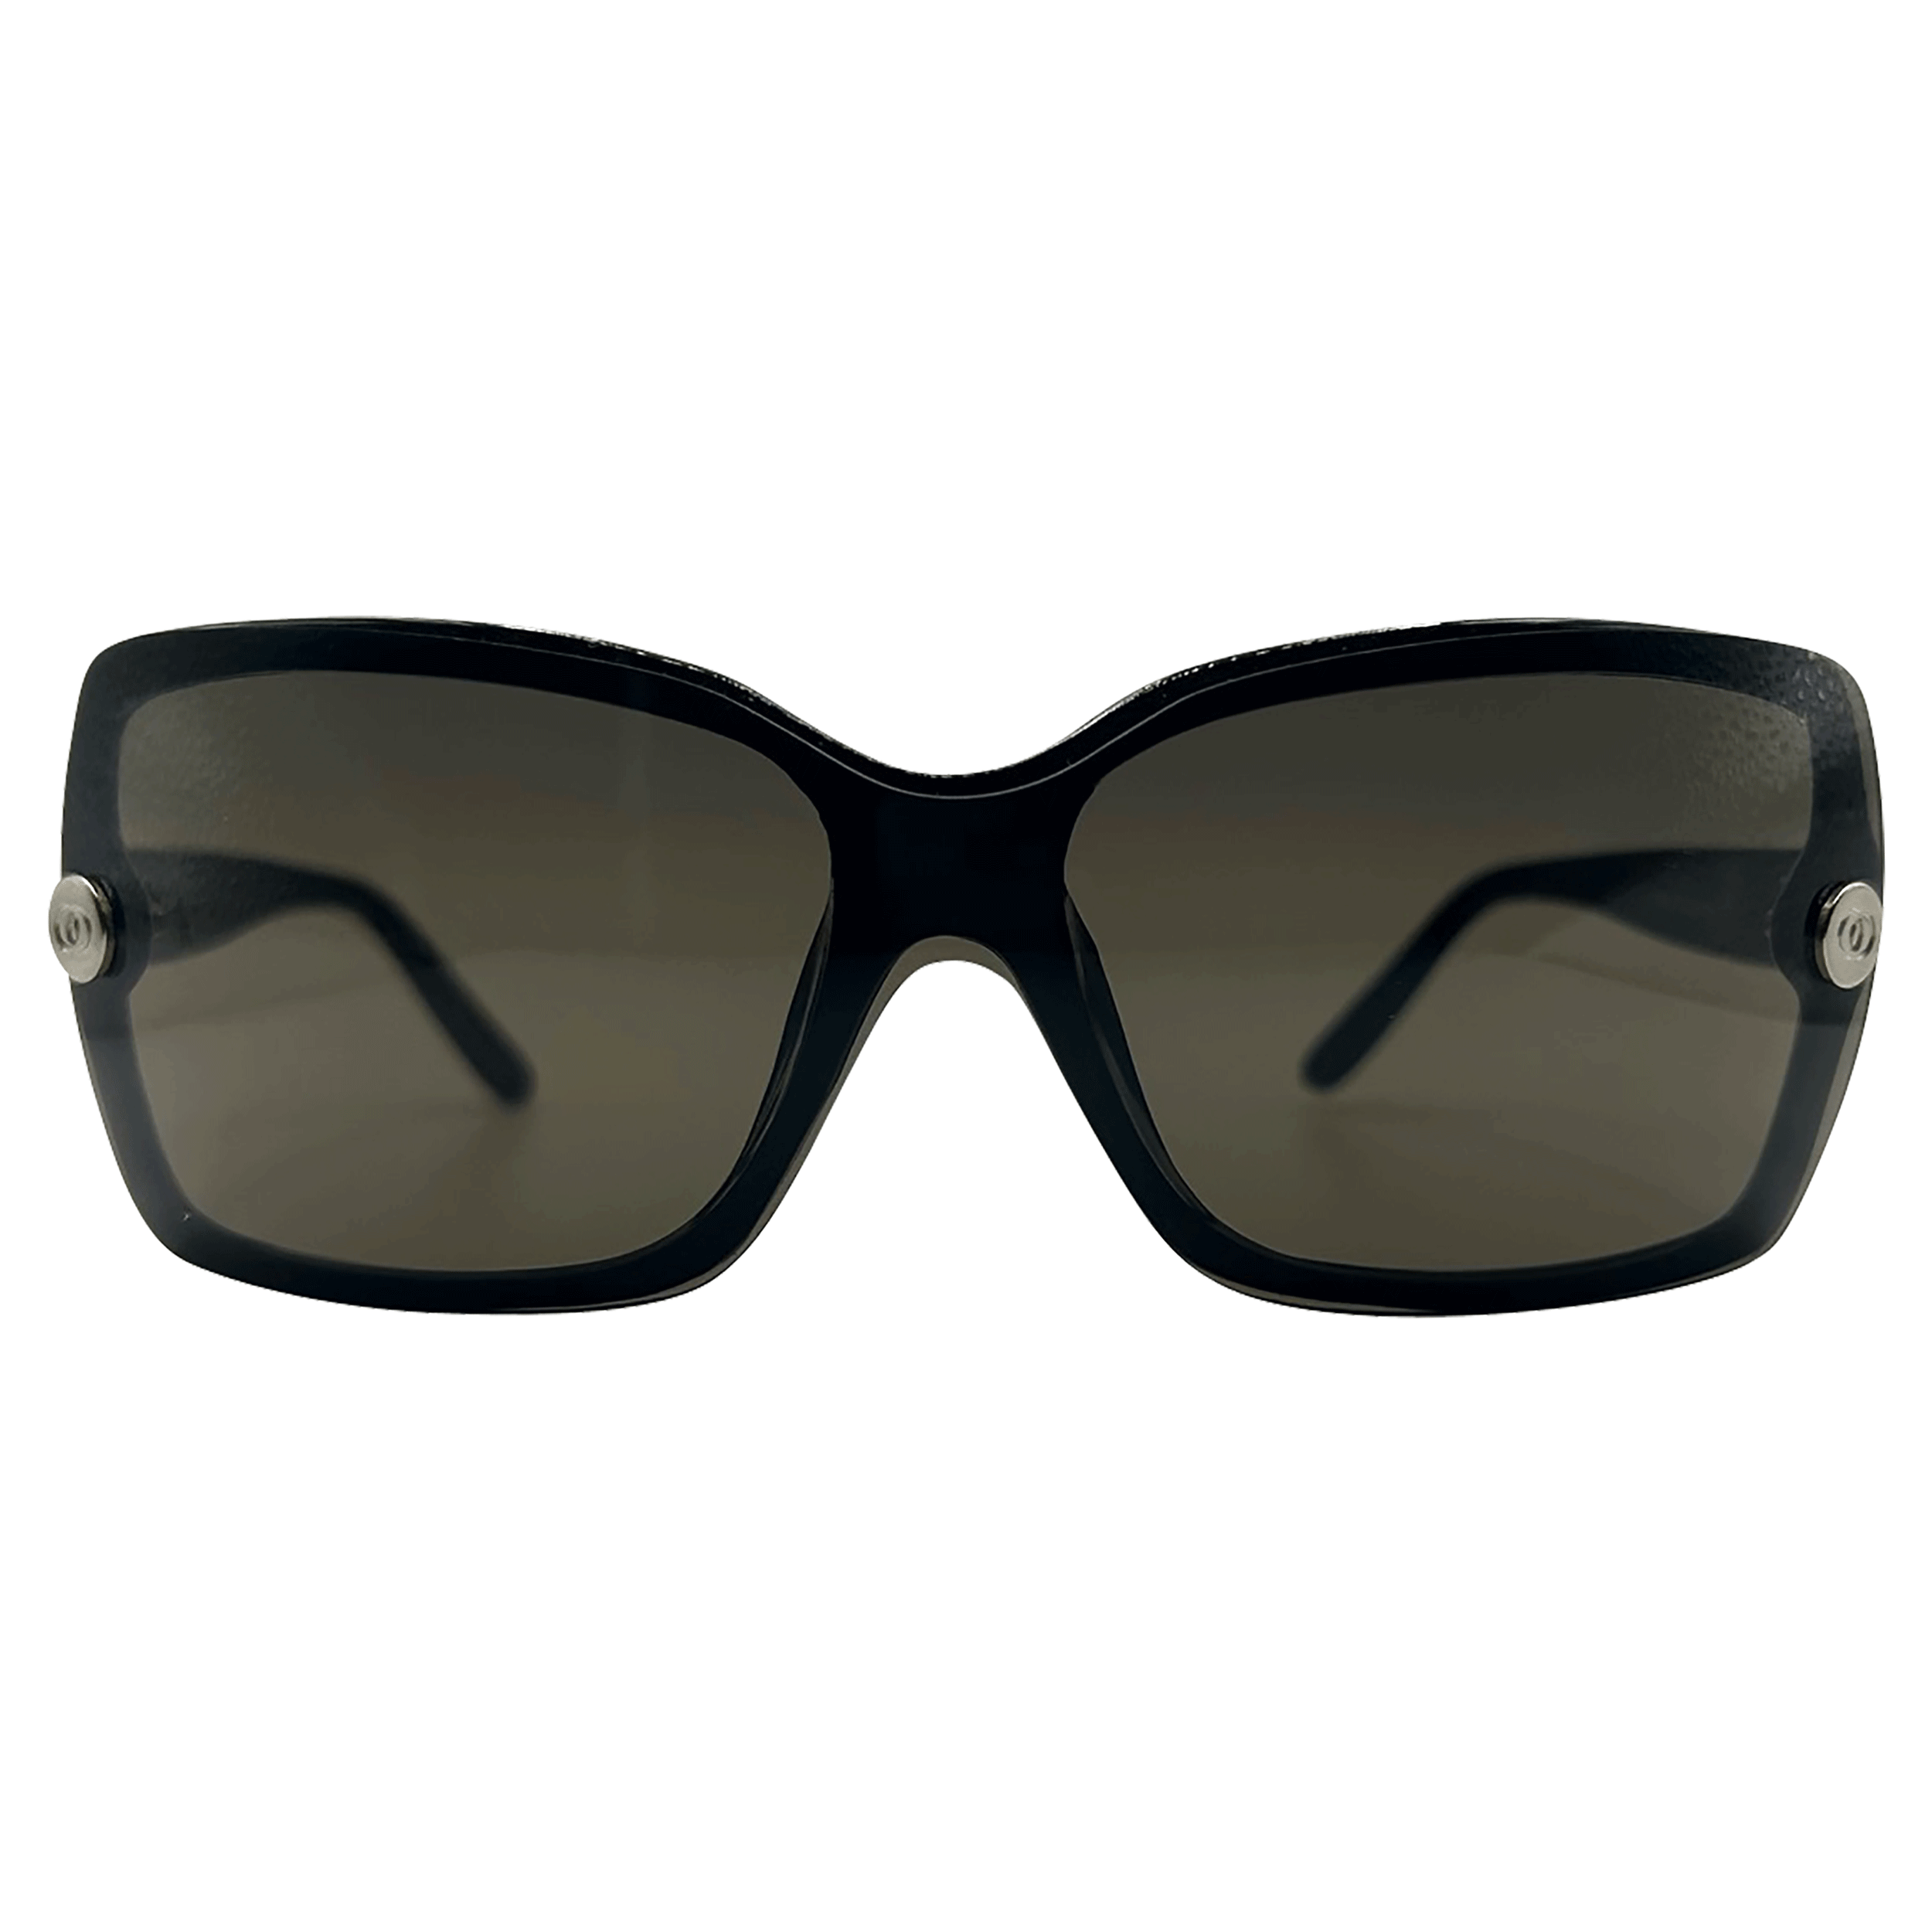 TRY ME Y2K Square Sunglasses